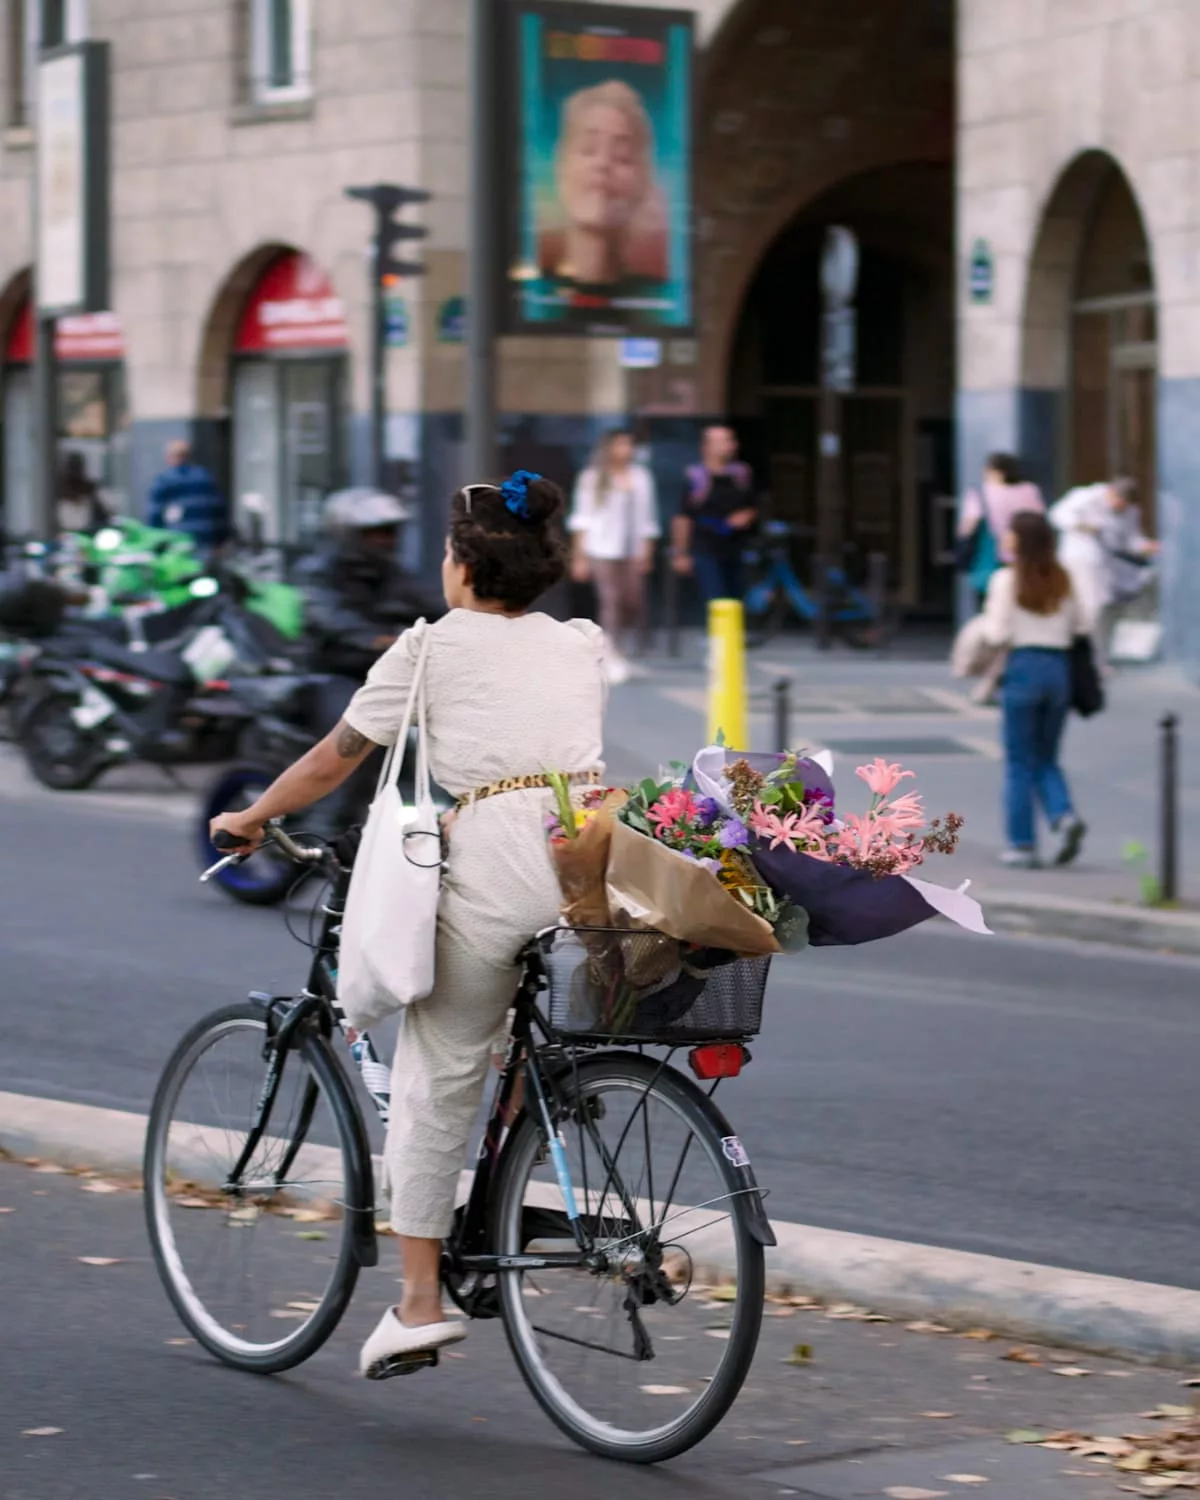 A Parisian woman in a bike with a basked full of flowers